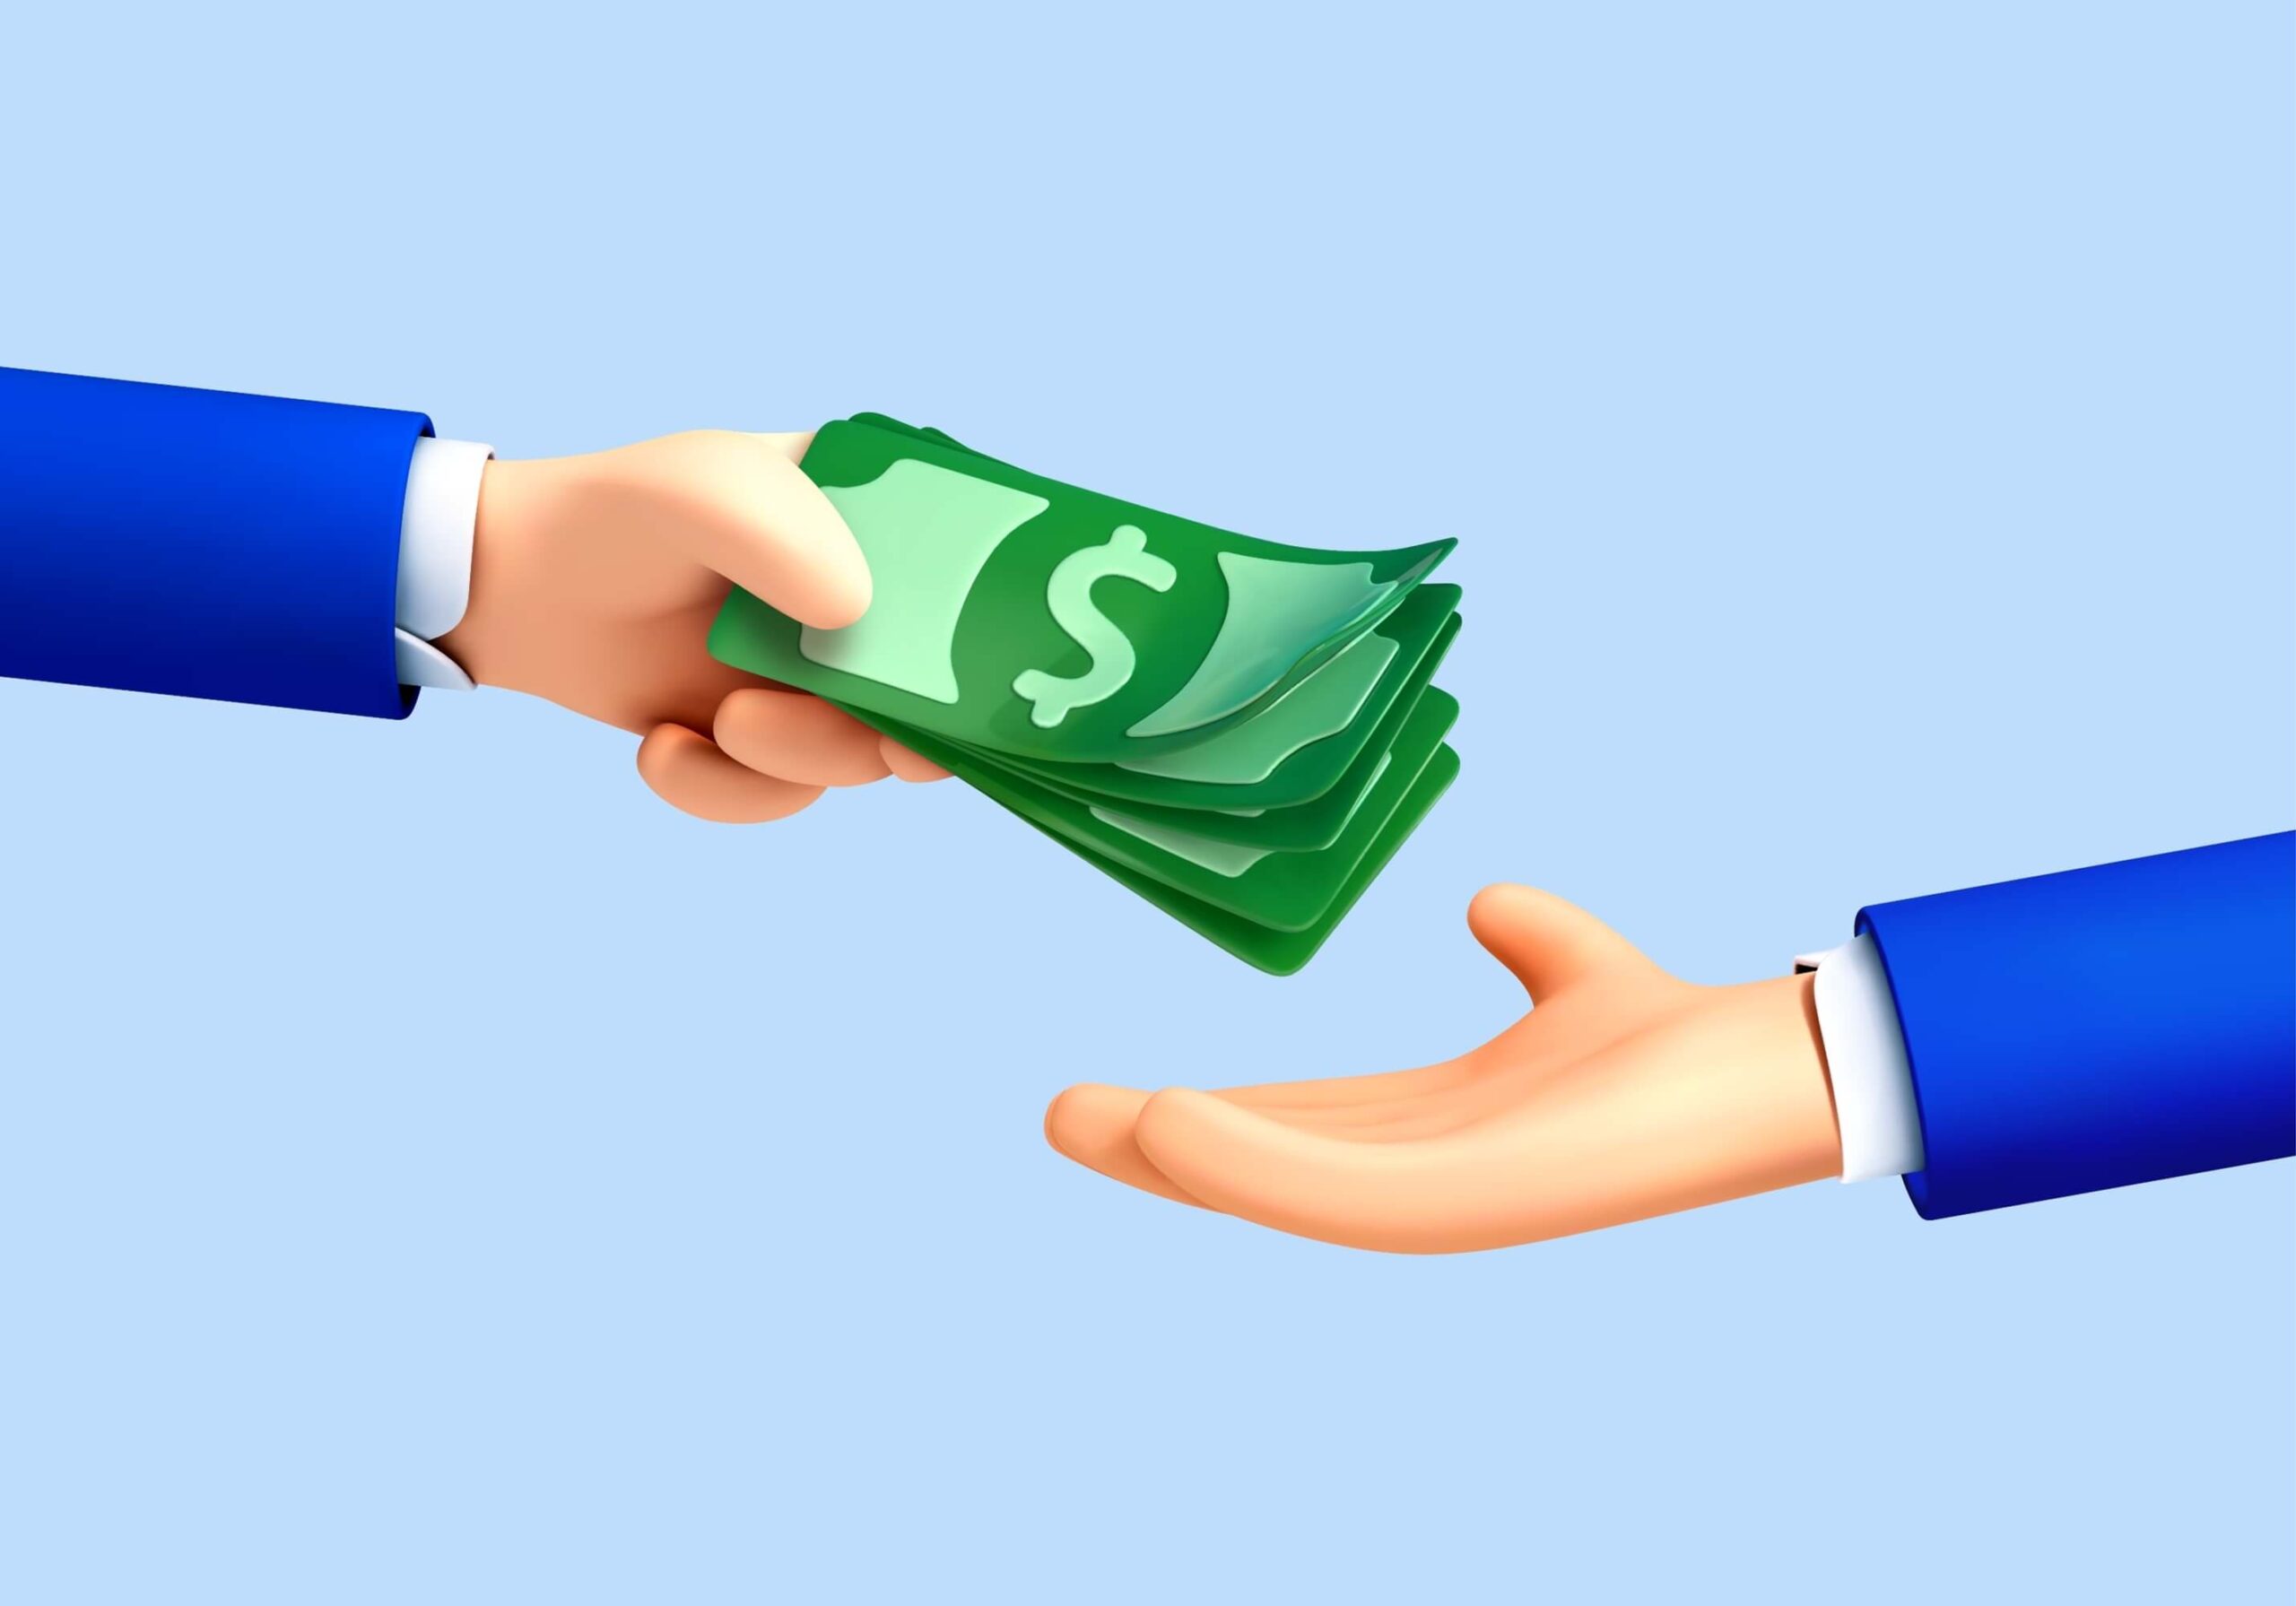 A cartoon image of a hand holding out a stack of money, giving it to a different hand representing paying 